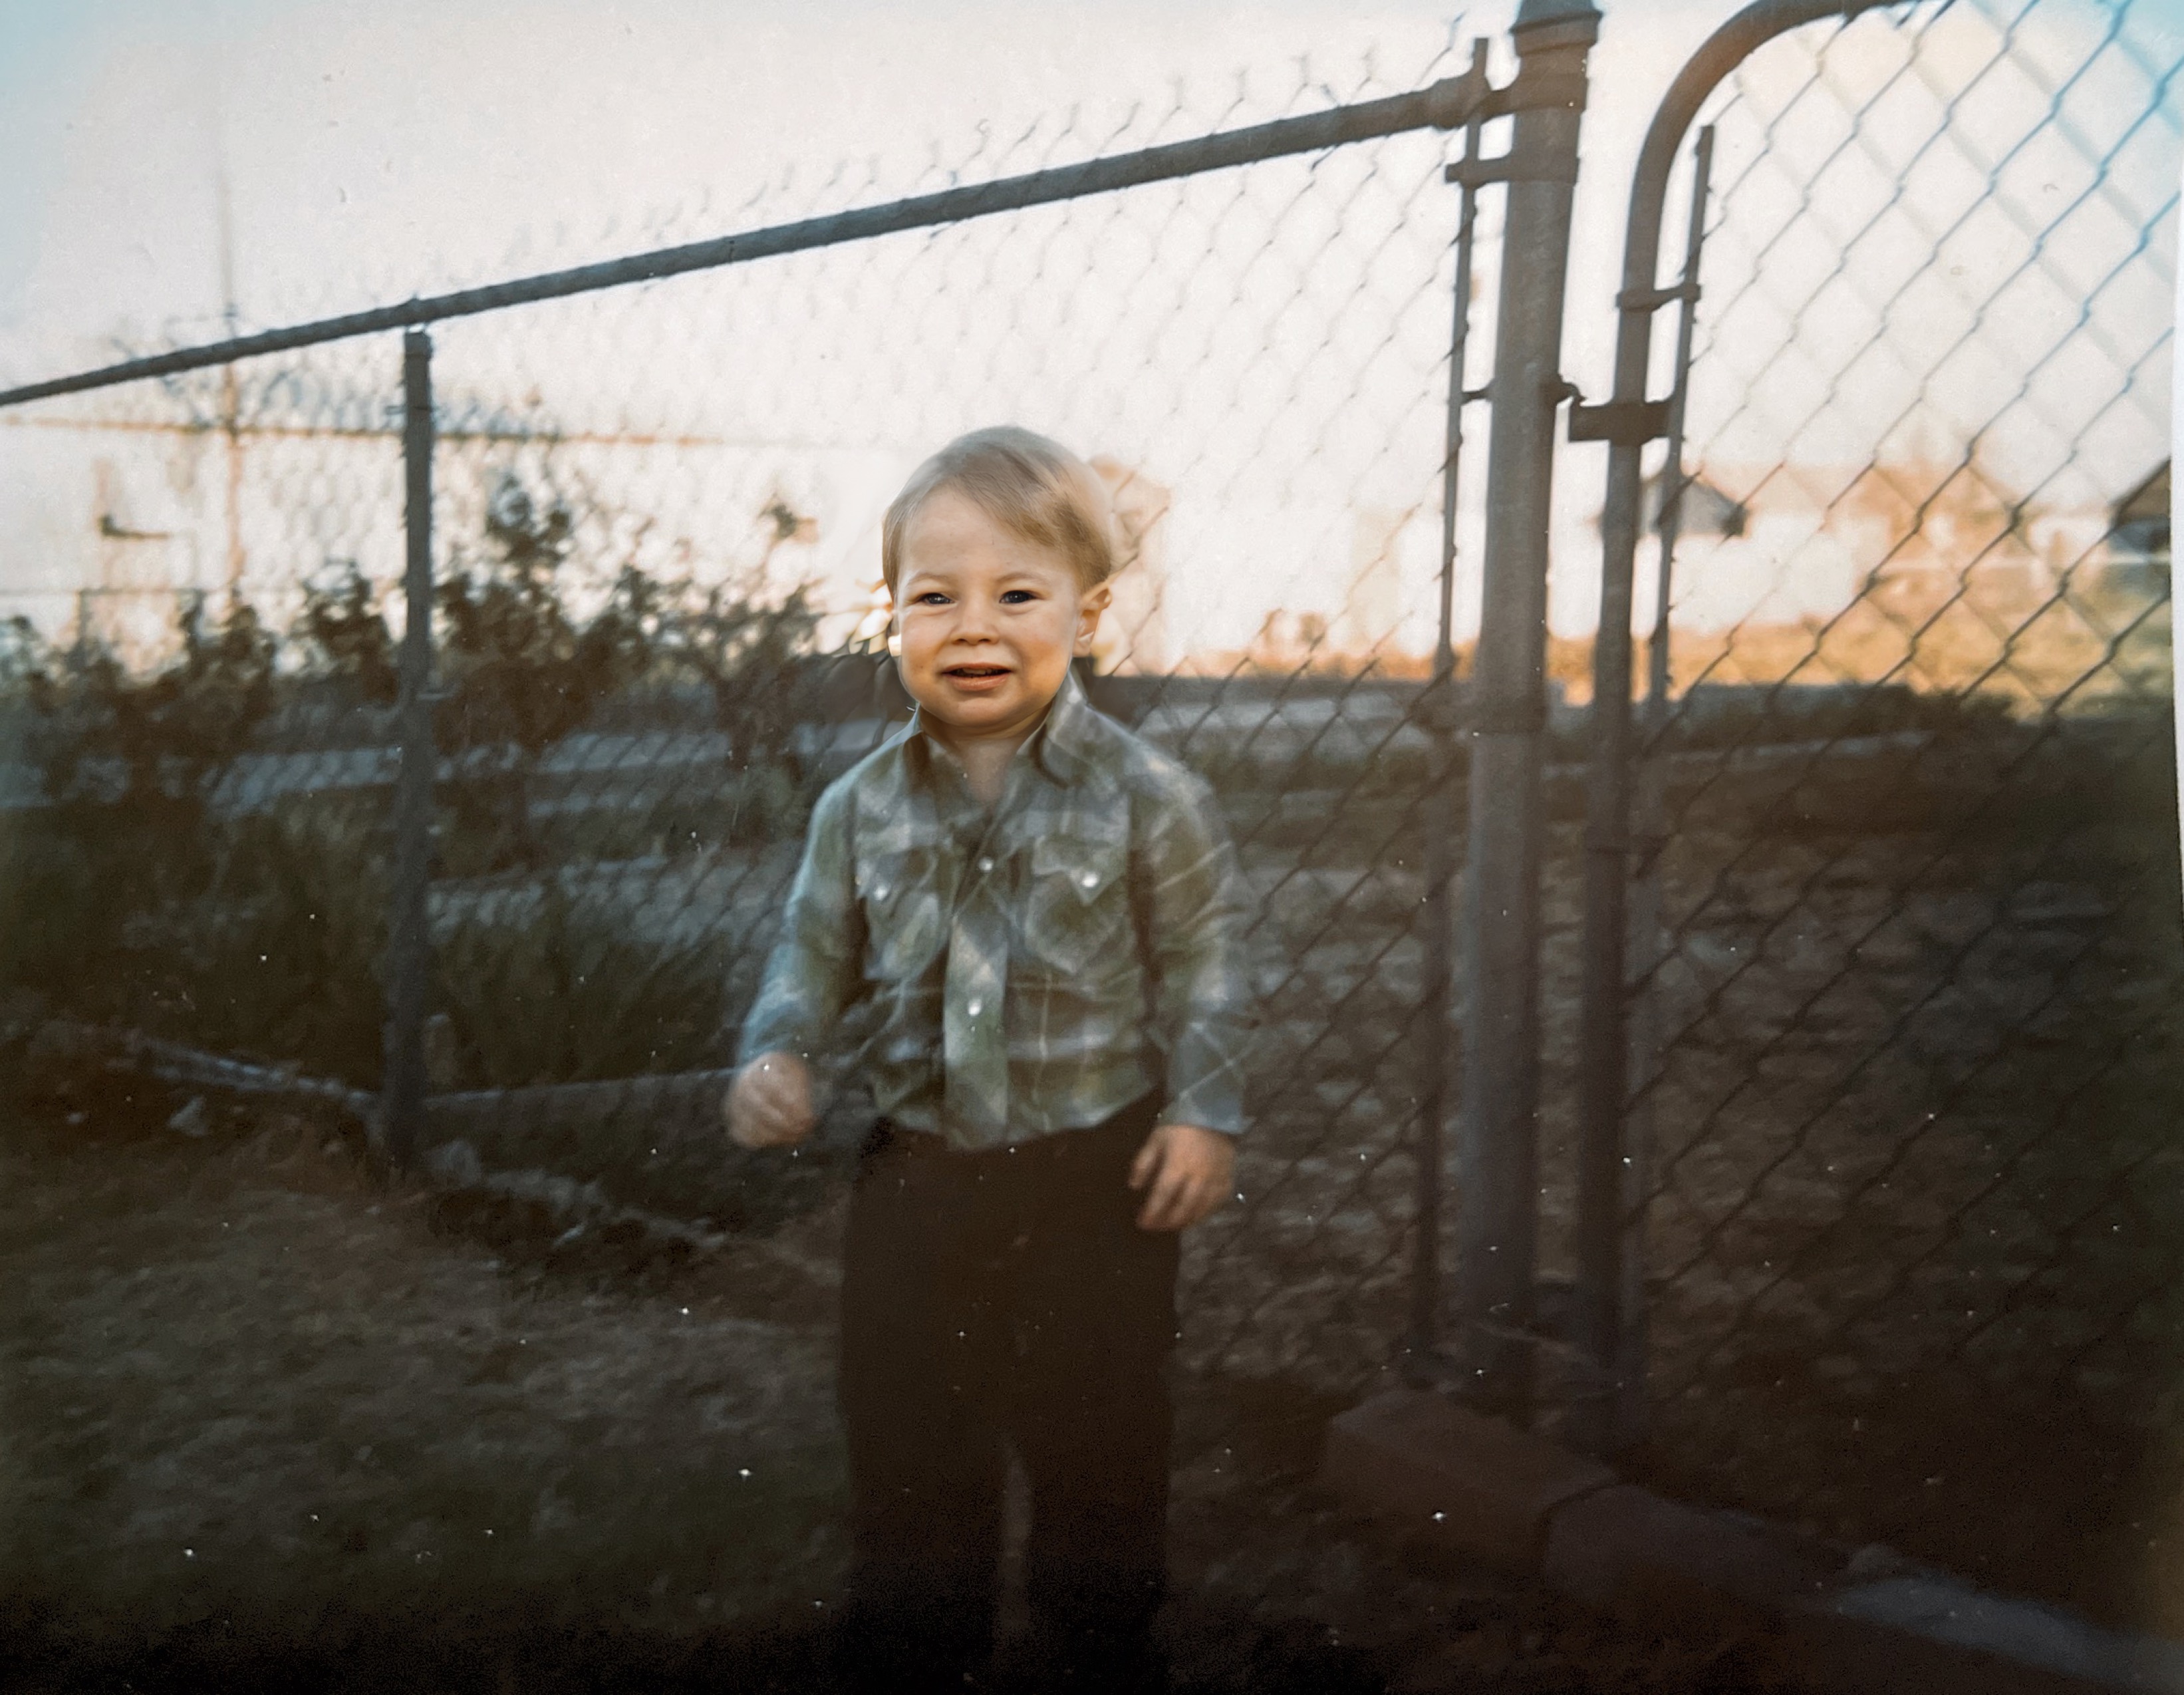 David Martin Pringle 1969 at Eunice,NM. His first pair of jeans, shirt and cowboy boots.